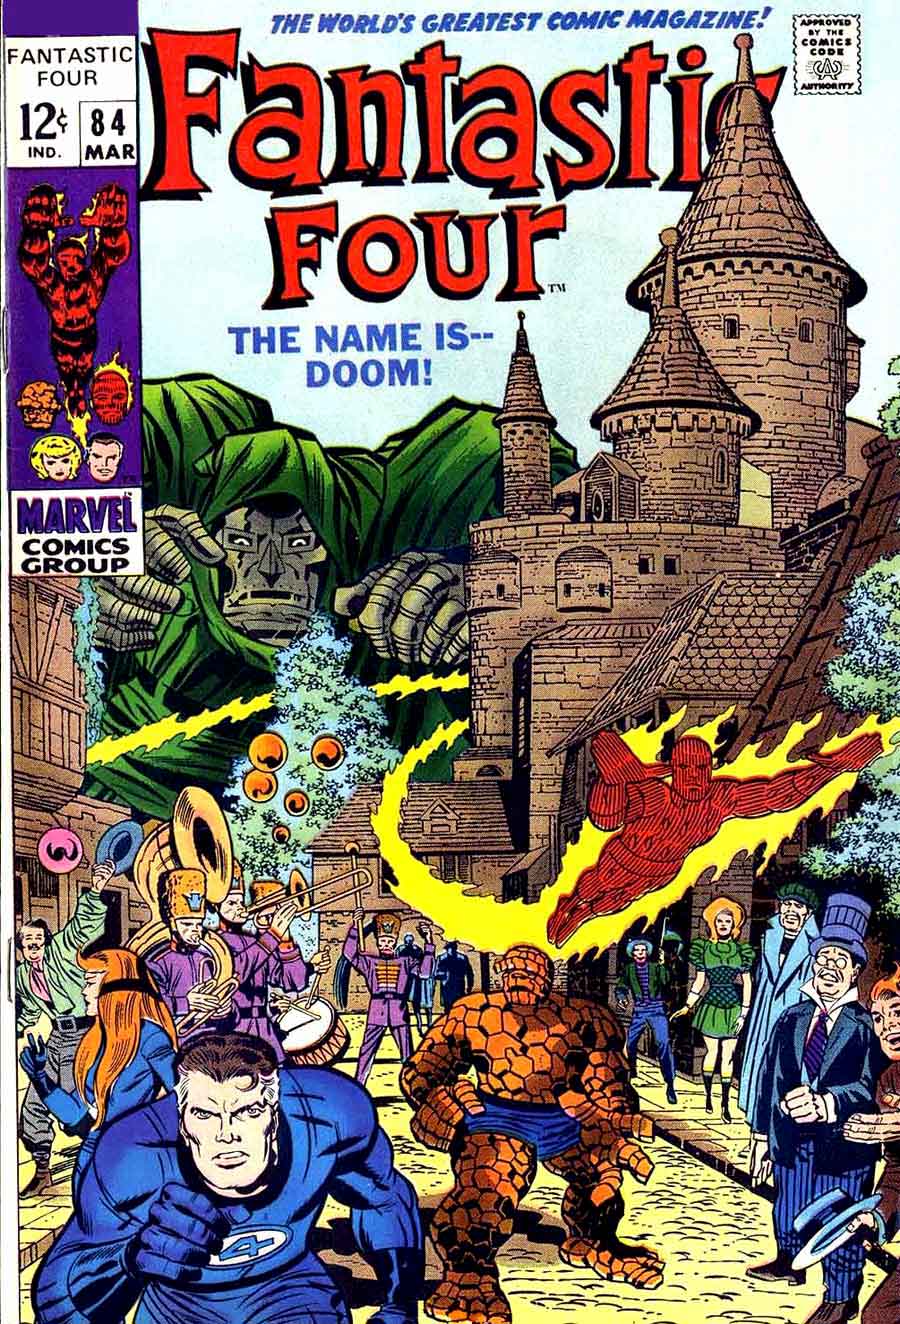 Fantastc Four v1 #84 marvel 1960s silver age comic book cover art by Jack Kirby